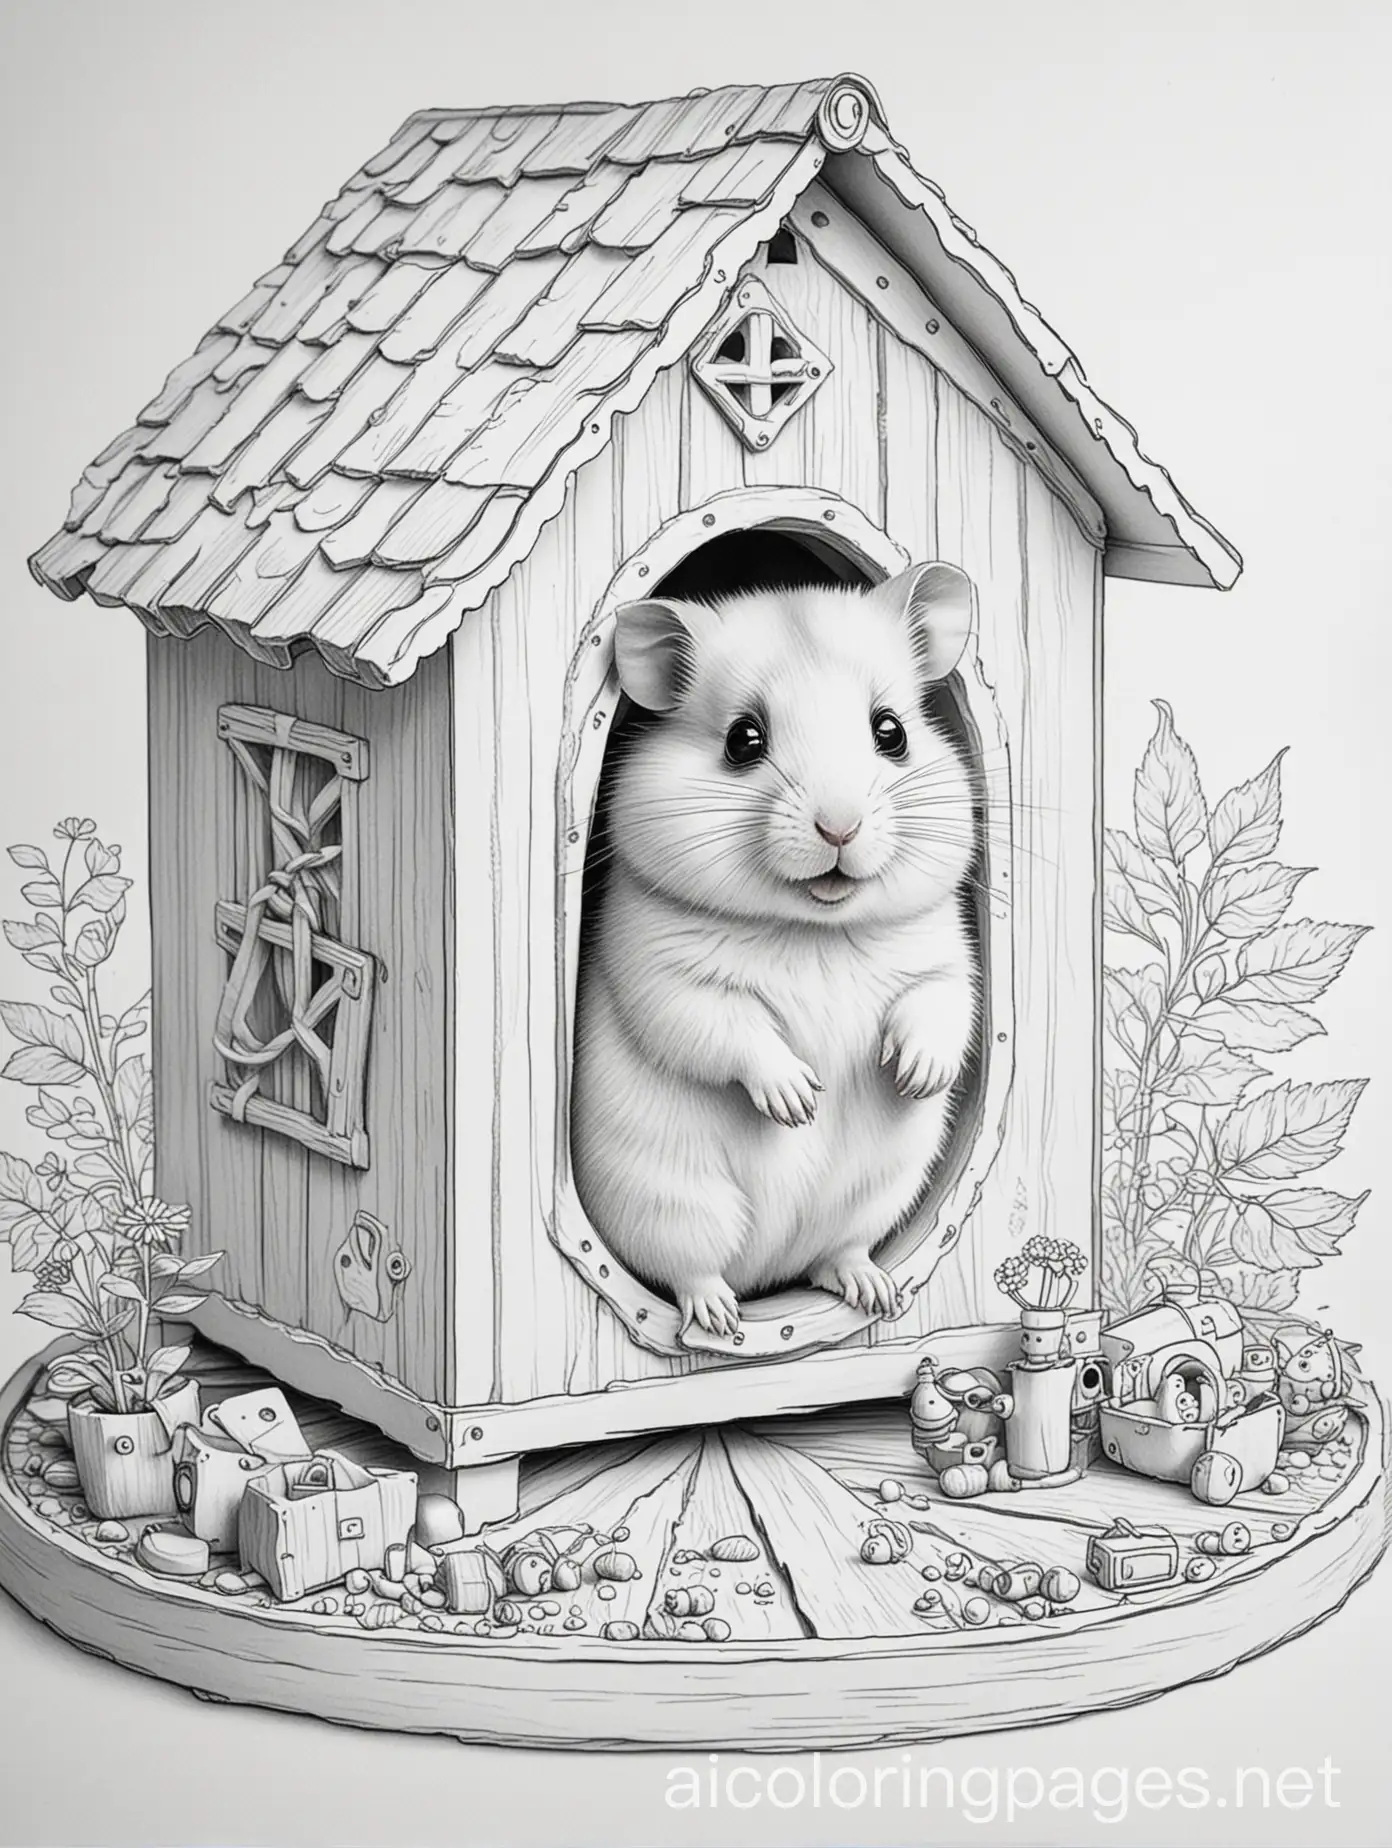 Cute hamster running on a wheel in a cozy little house with tiny furniture and toys scene, Coloring Page, black and white, line art, plain white background, Simplicity, Ample White Space. The background of the coloring page is plain white to make it easy for young children to color within the lines. The outlines of all the subjects are easy to distinguish, making it simple for kids to color without too much difficulty, Coloring Page, black and white, line art, white background, Simplicity, Ample White Space. The background of the coloring page is plain white to make it easy for young children to color within the lines. The outlines of all the subjects are easy to distinguish, making it simple for kids to color without too much difficulty